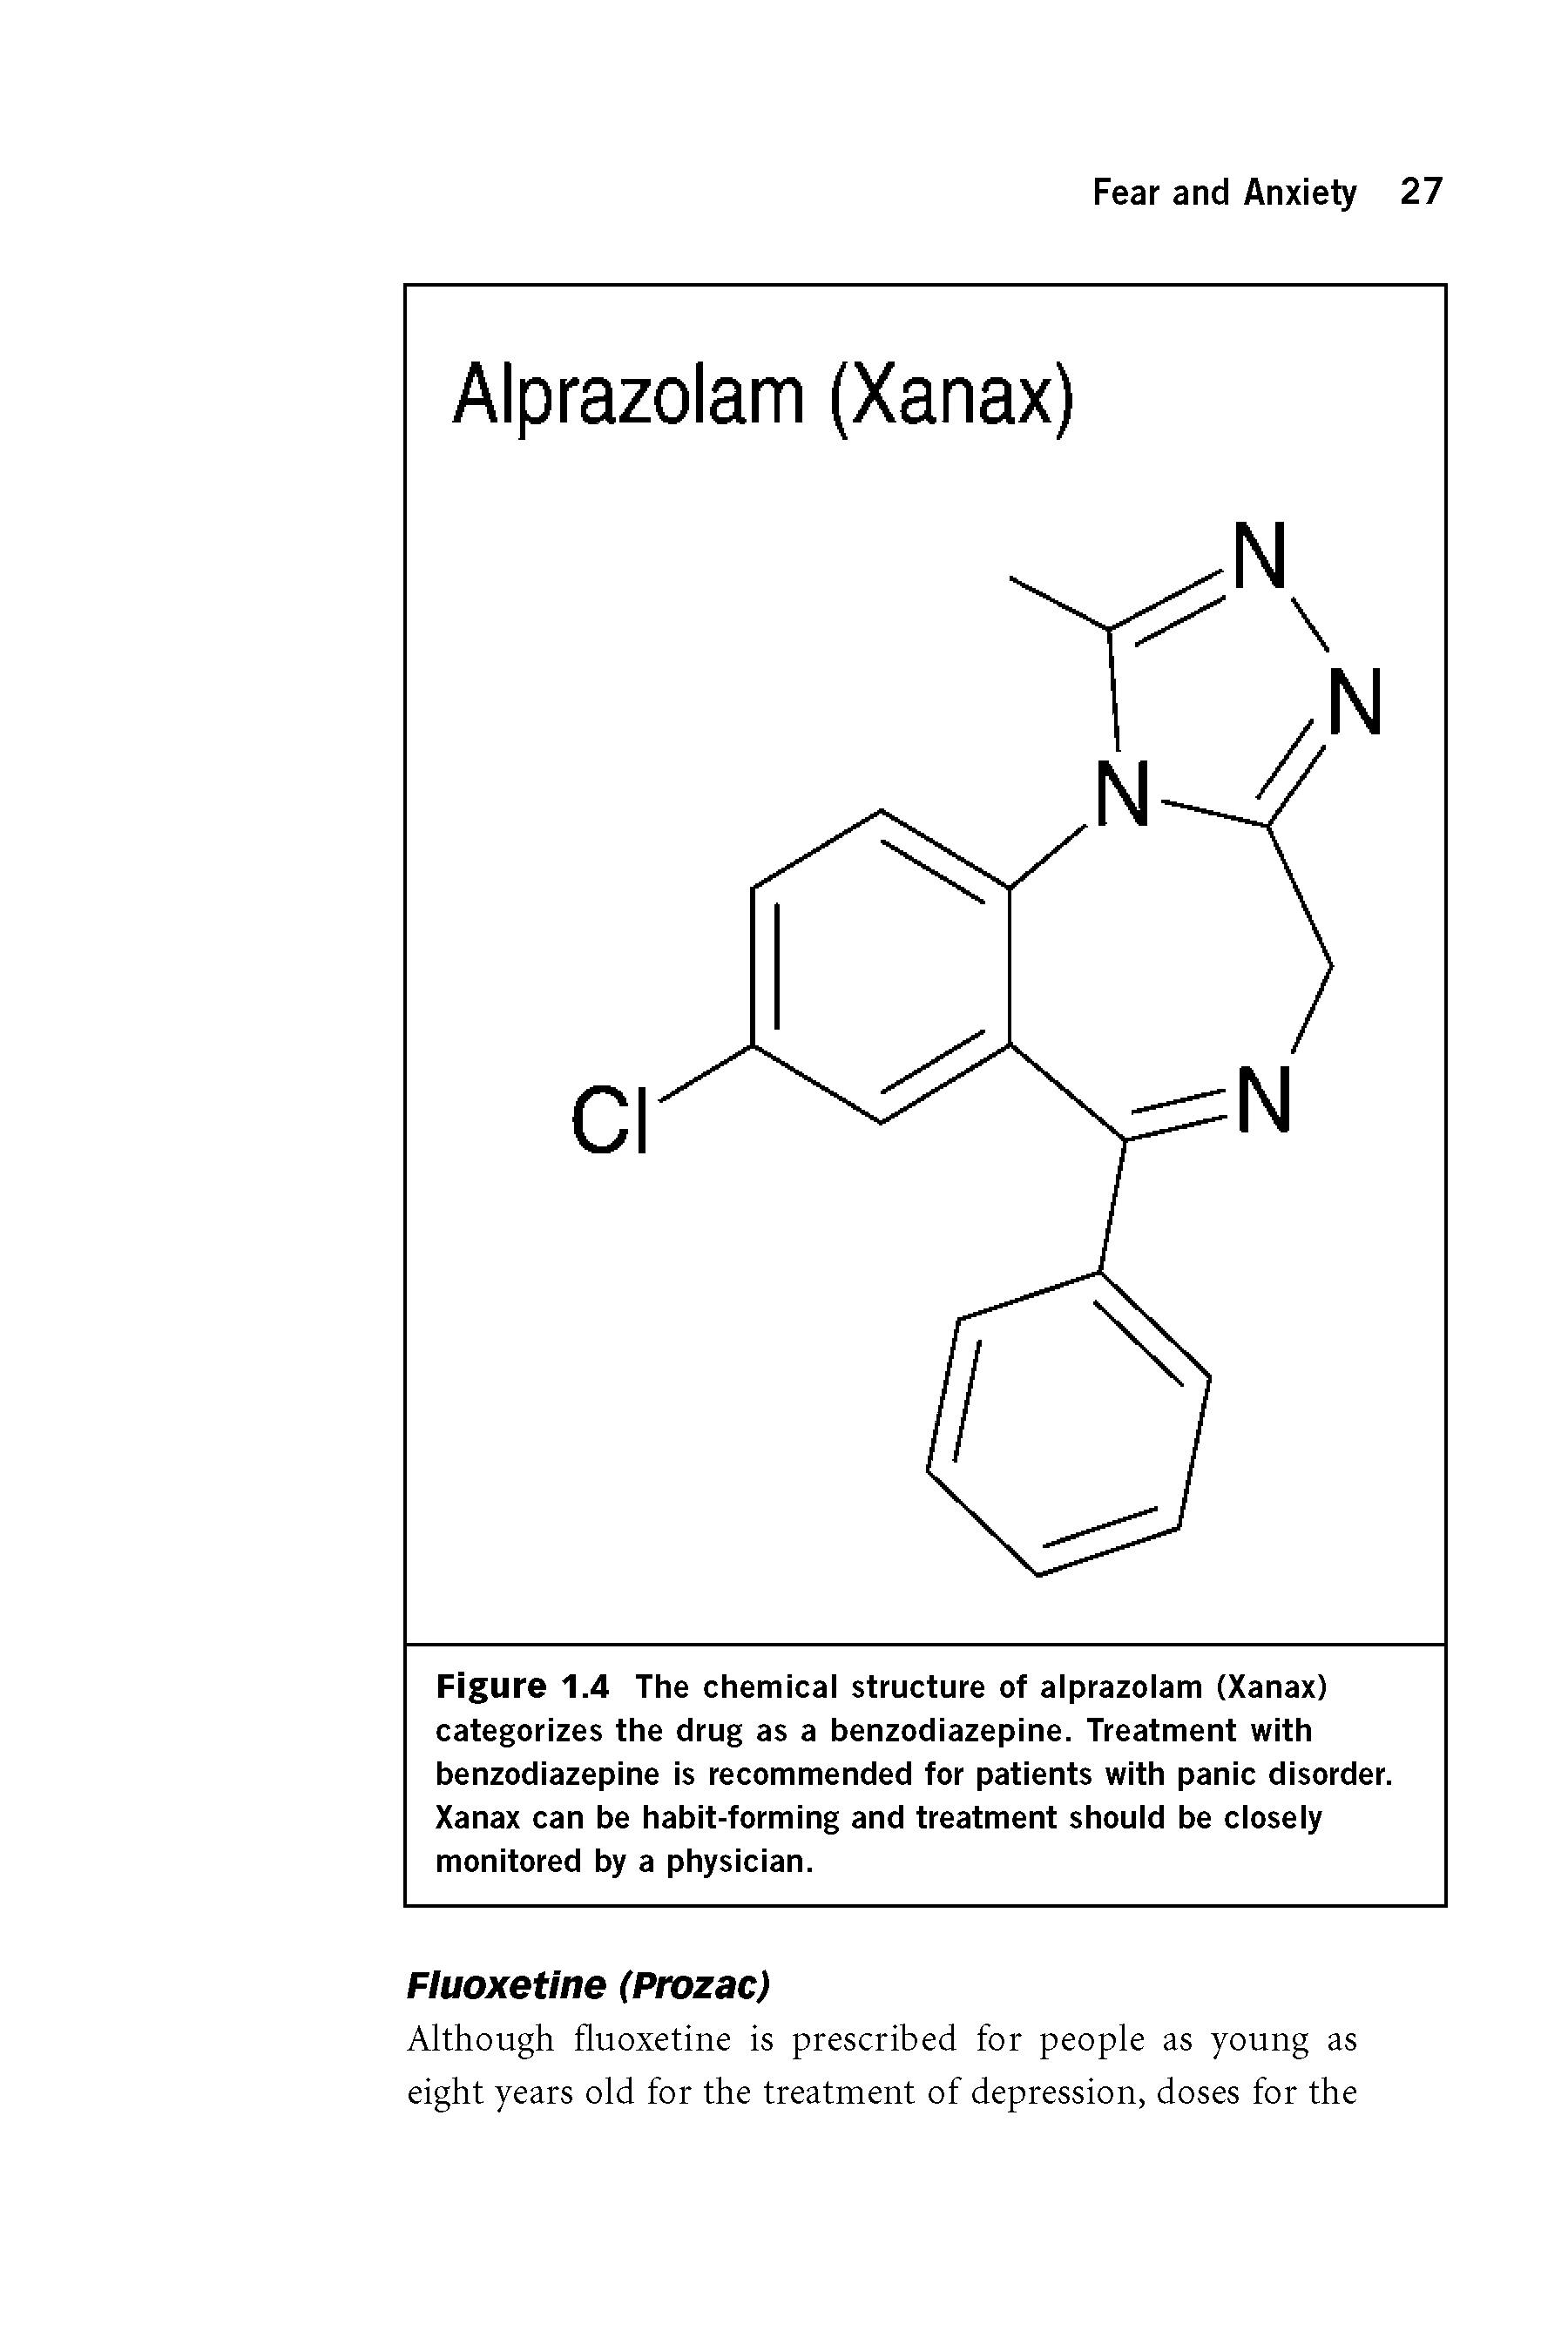 Figure 1.4 The chemical structure of alprazolam (Xanax) categorizes the drug as a benzodiazepine. Treatment with benzodiazepine is recommended for patients with panic disorder. Xanax can be habit-forming and treatment should be closely monitored by a physician.